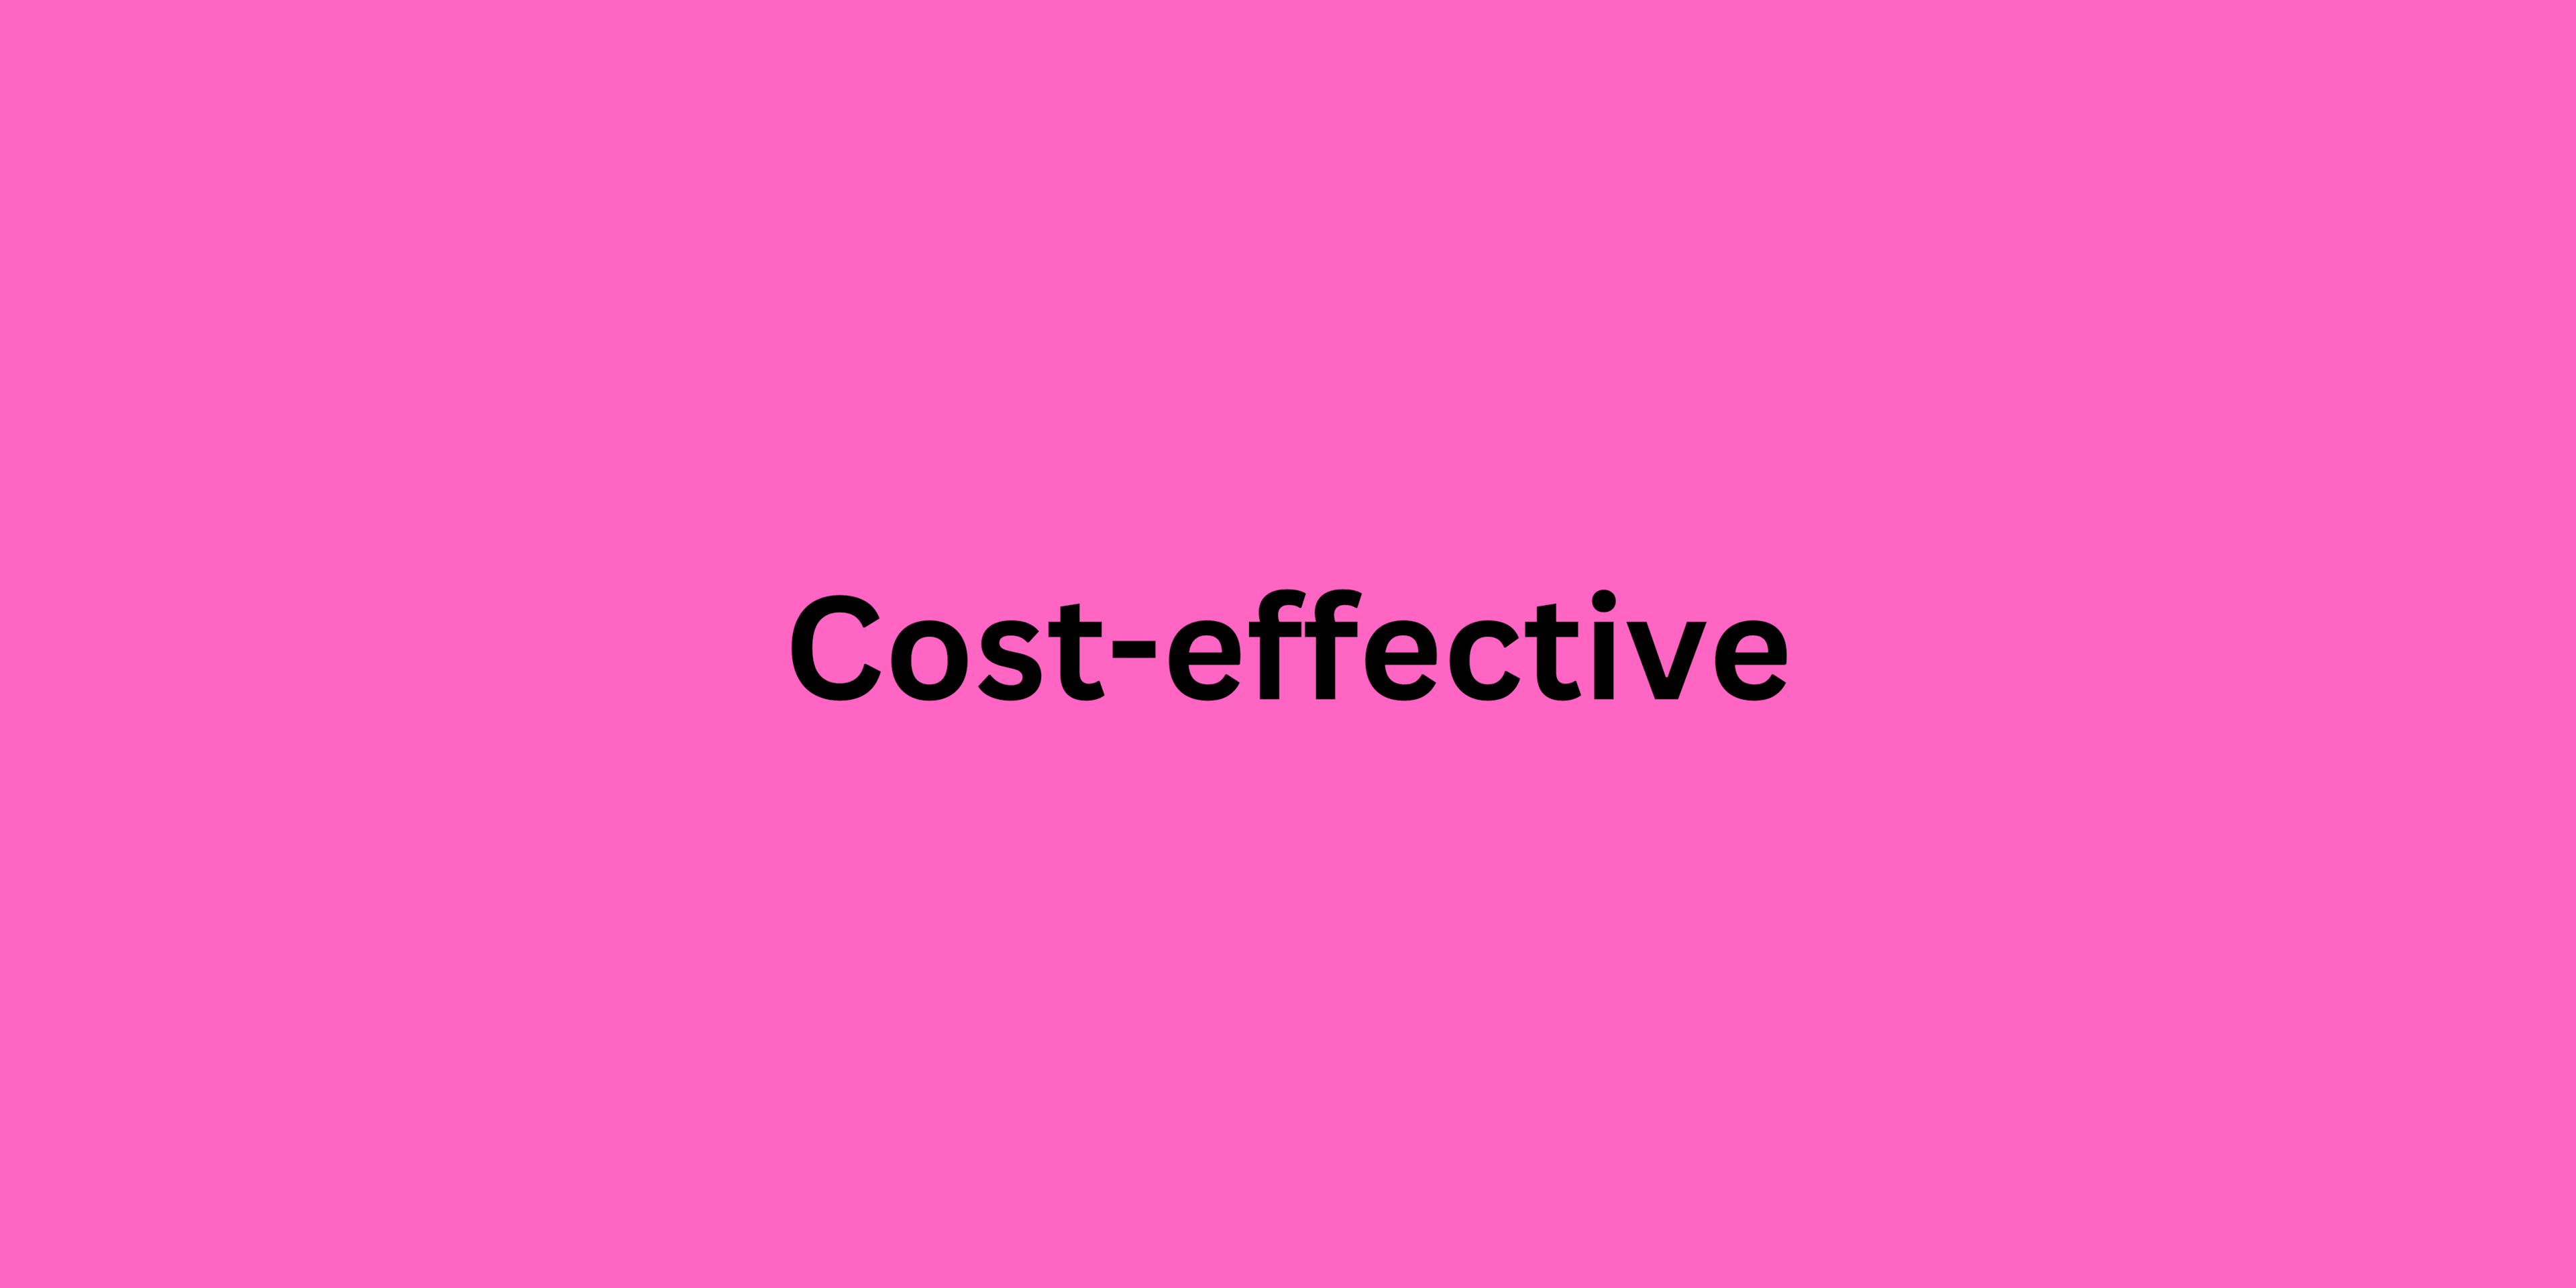 Cost-effective